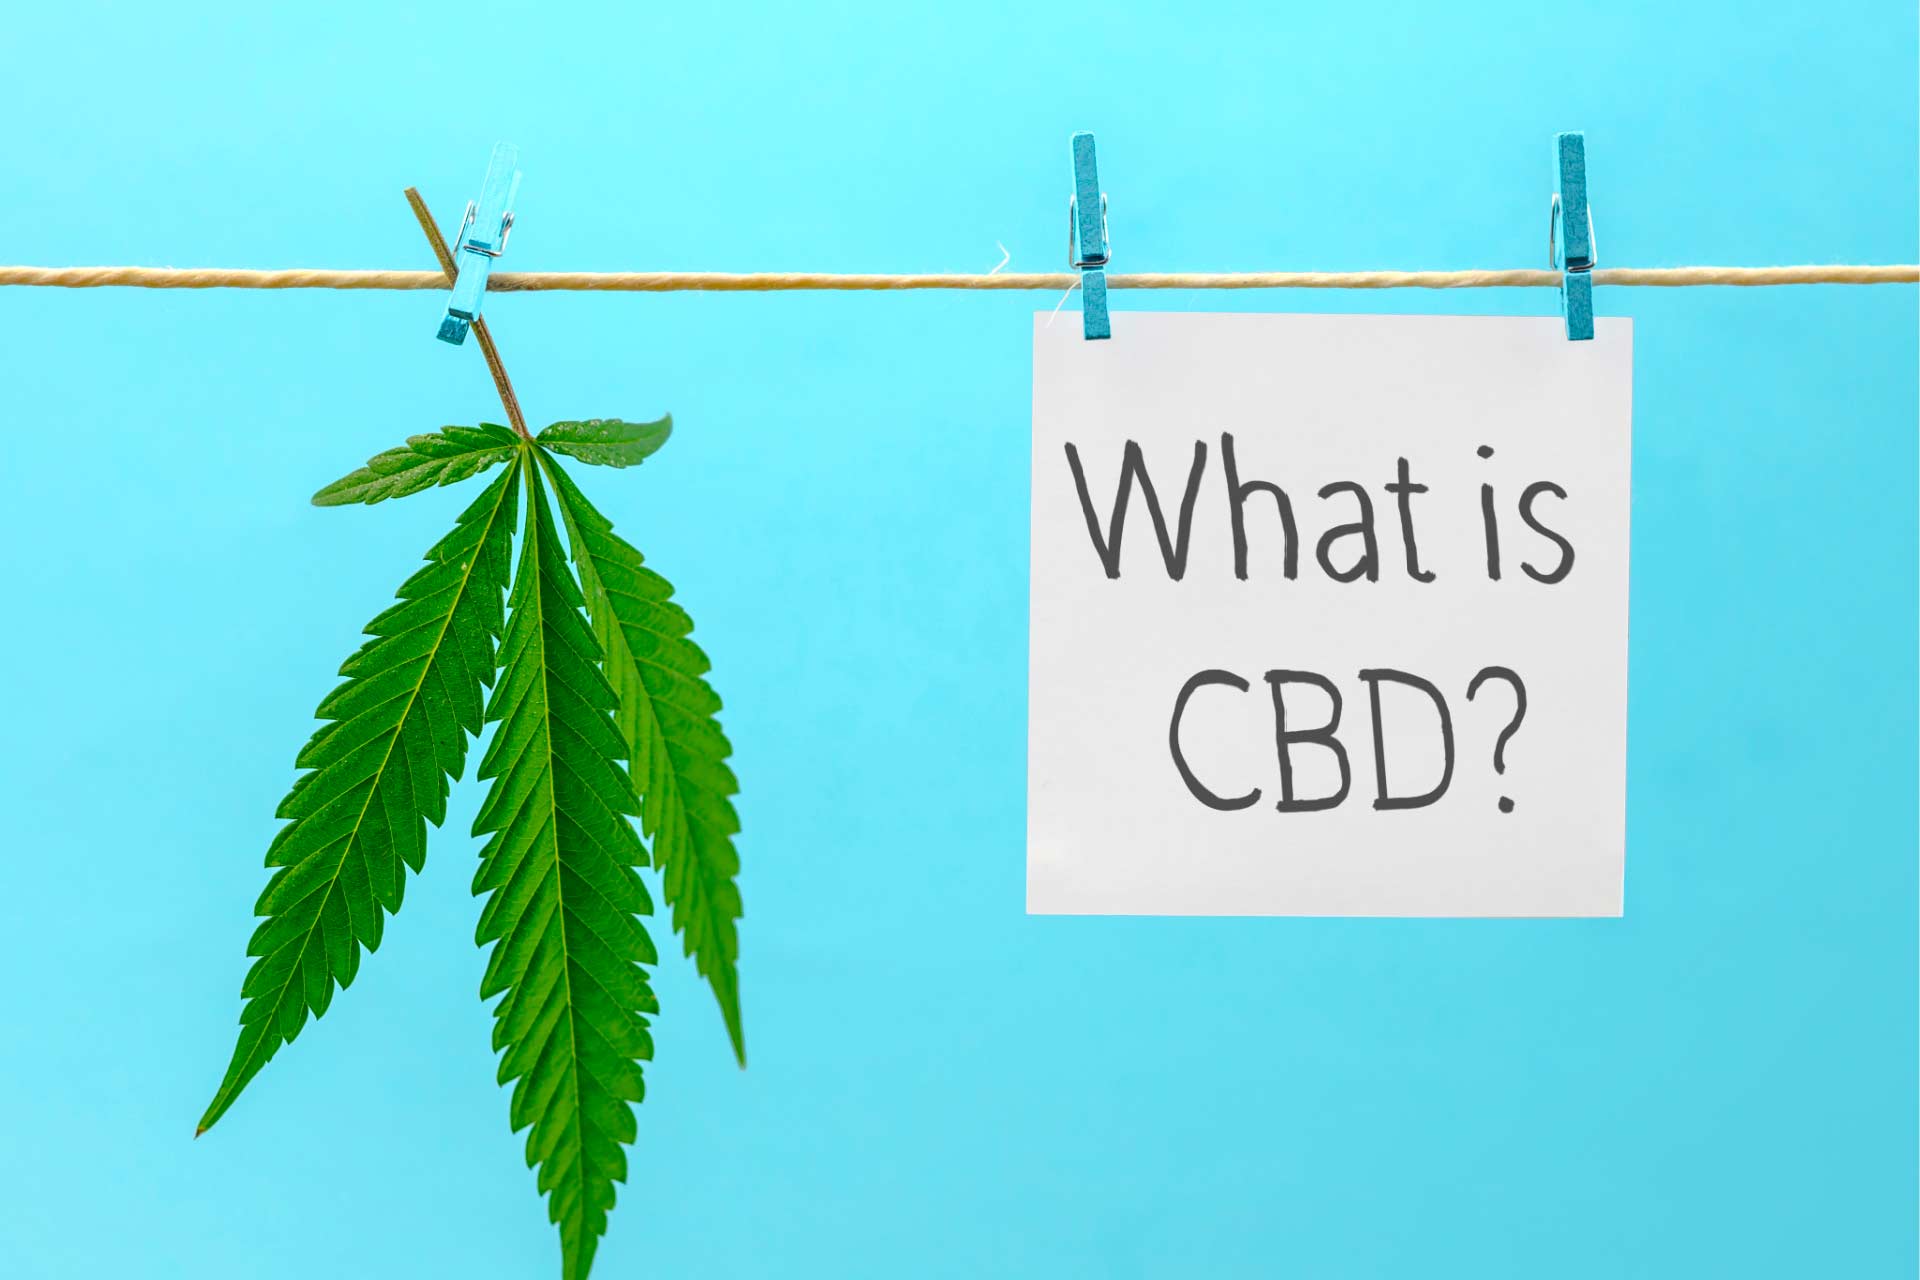 Clothesline with a hemp leaf and sign that says “What is CBD?”